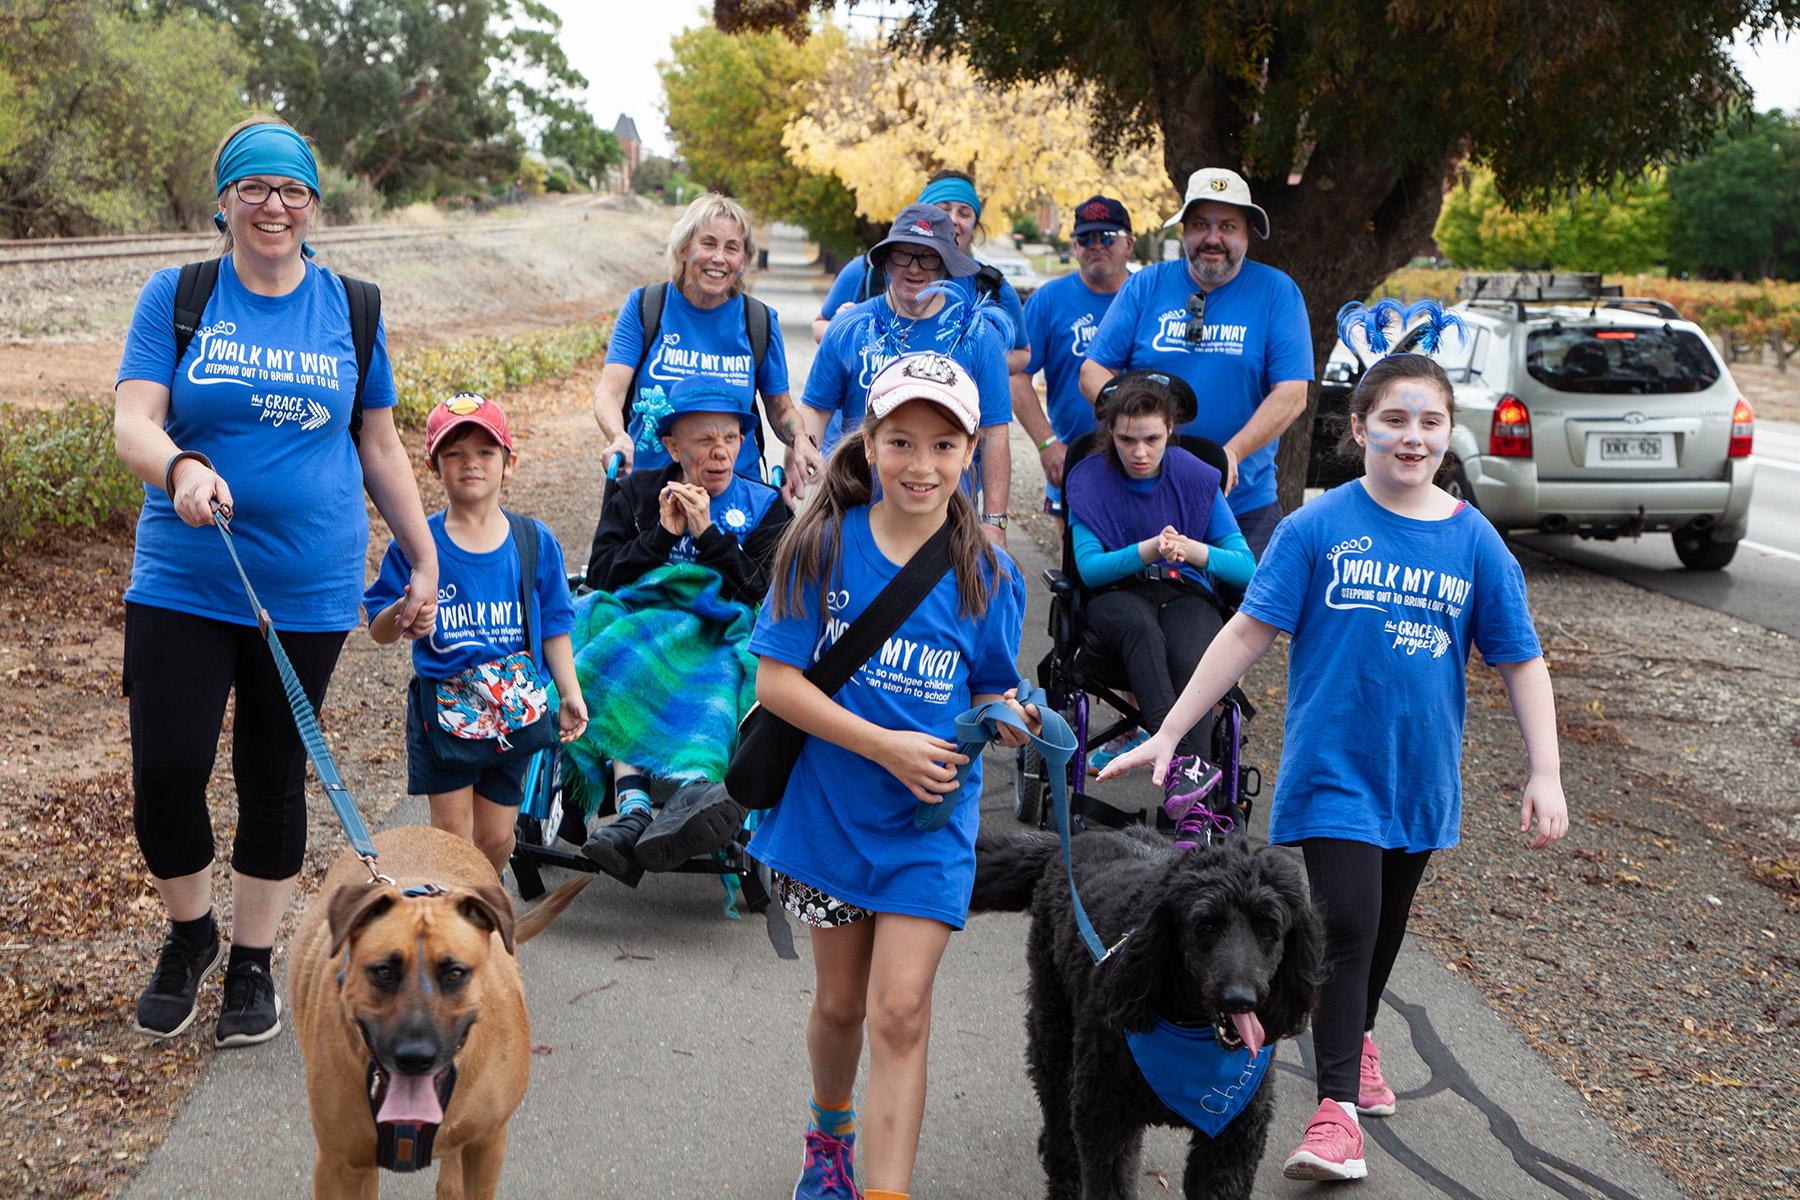 Clients and staff of South Australiaâs Lutheran Disability Service joined hundreds of participants taking part in a âWalk My Wayâ fundraising event through the Barossa Valley on 1 May. All photos: ALWS